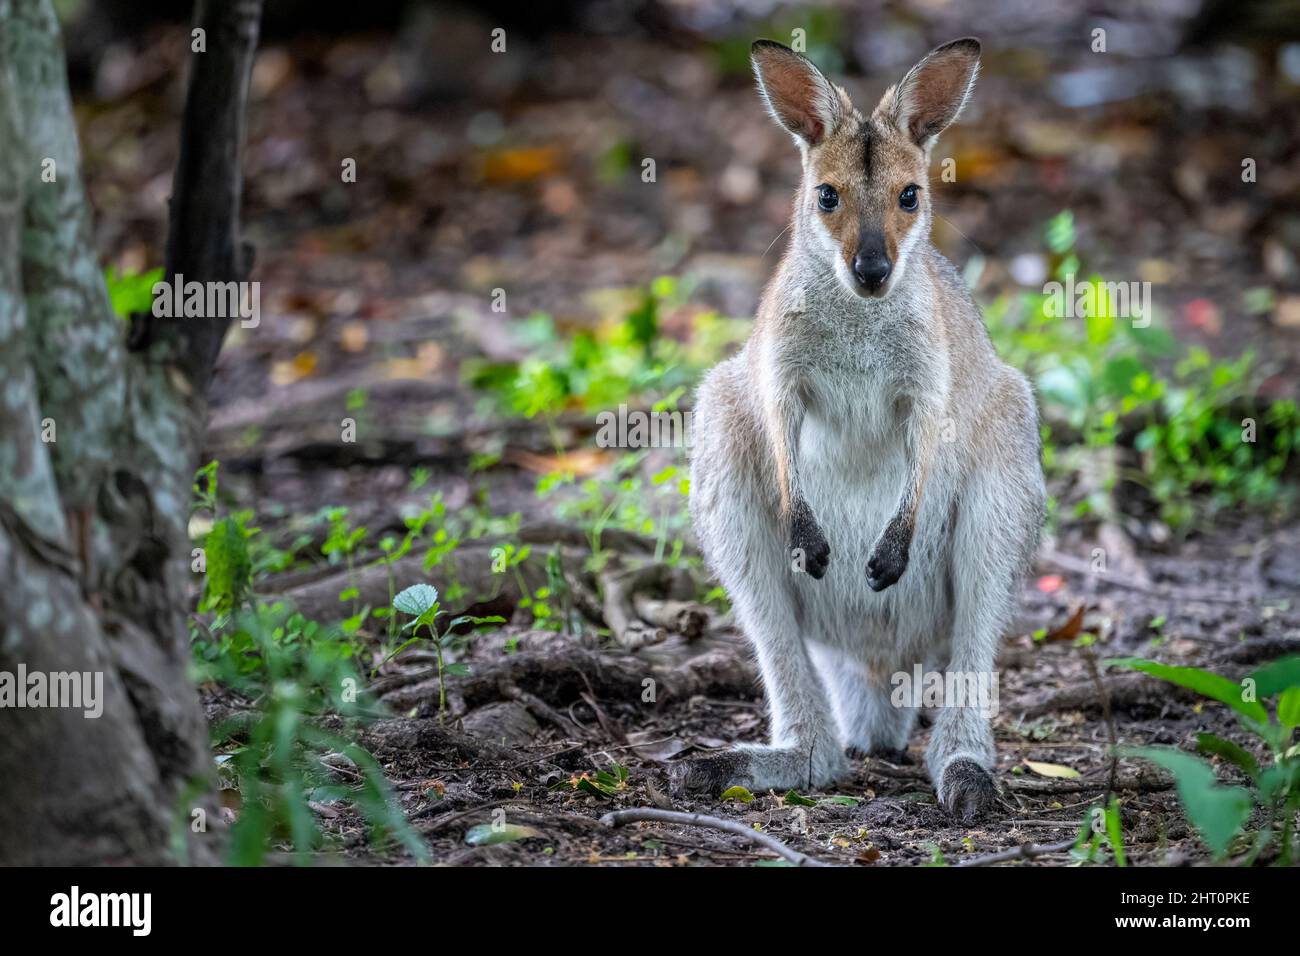 Portrait of Red-necked wallaby (Macropus rufogriseus) standing and looking at camera Stock Photo